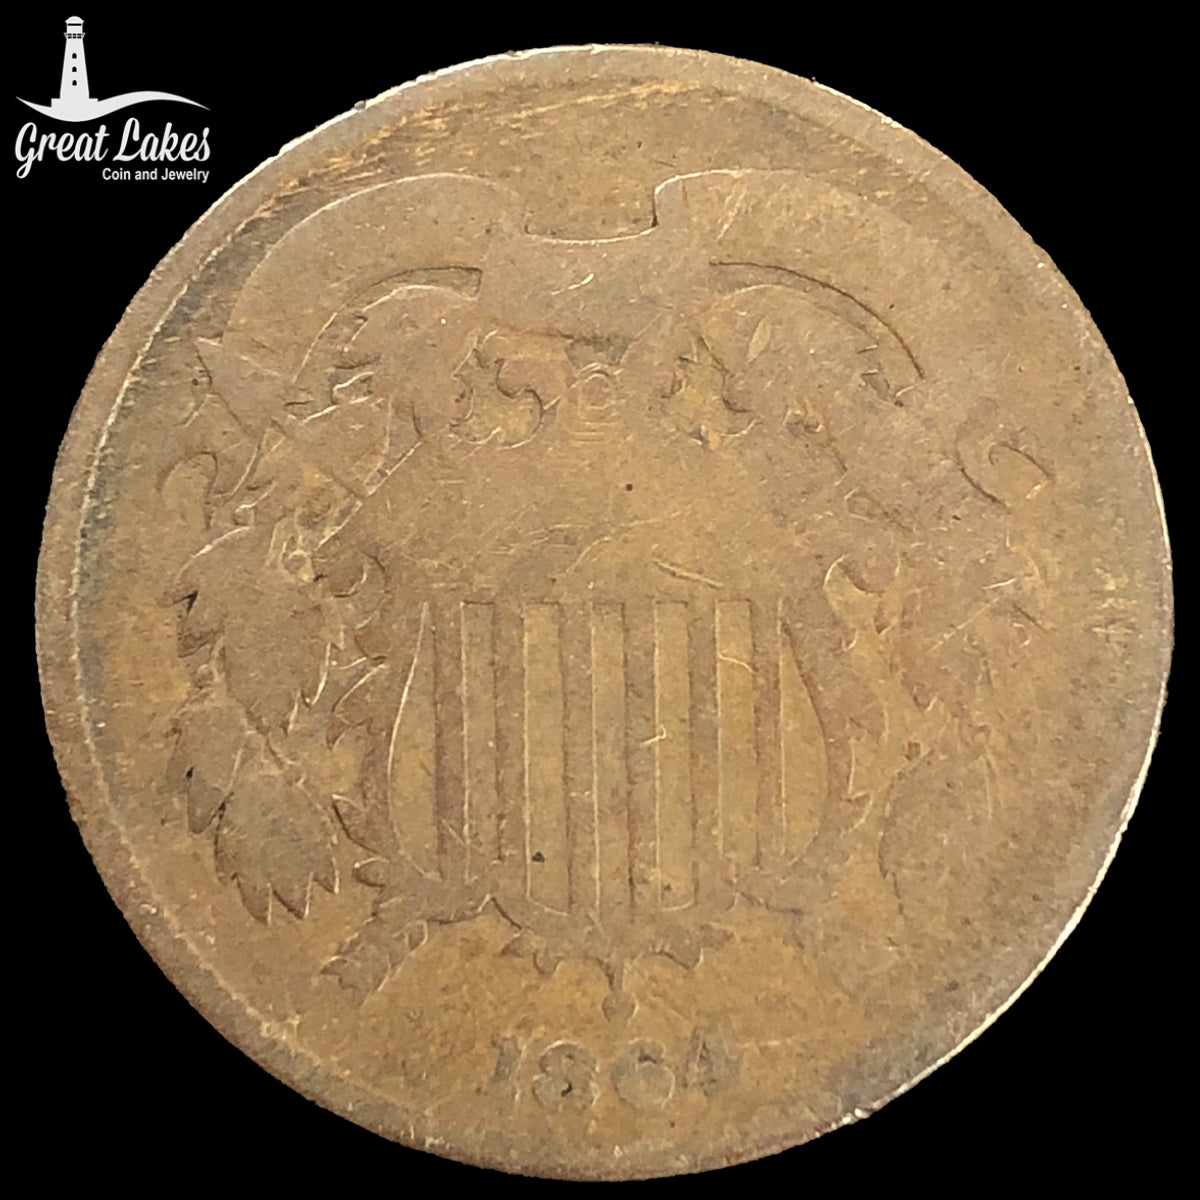 1864 Large Motto Two Cent Piece (G)